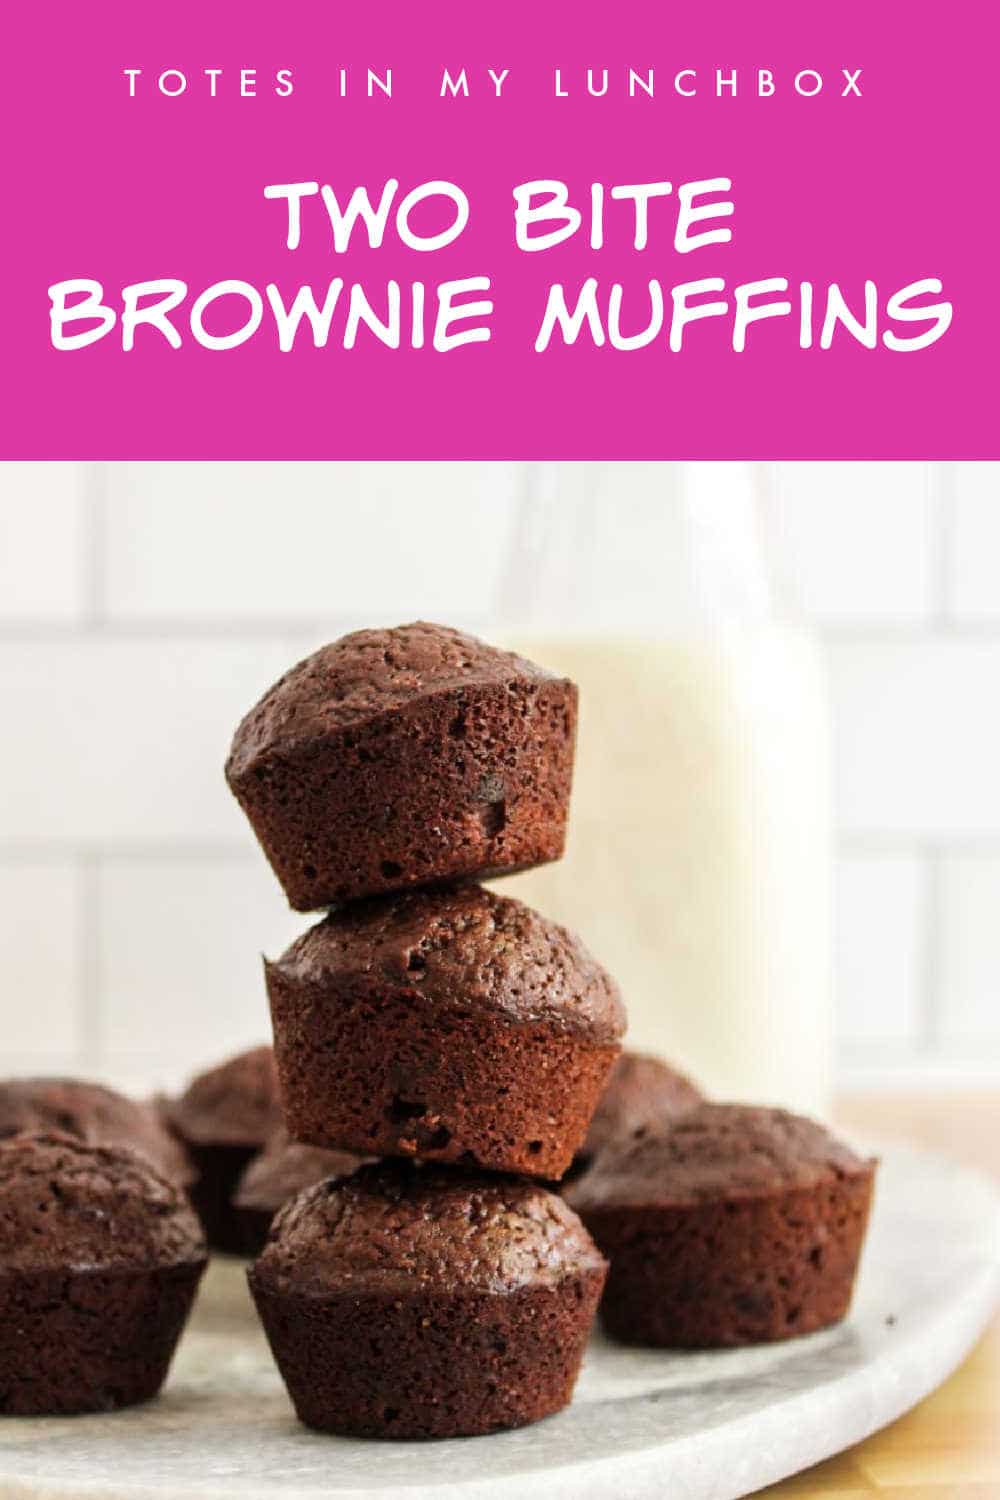 Two bite brownie muffins stacked on top of each other.